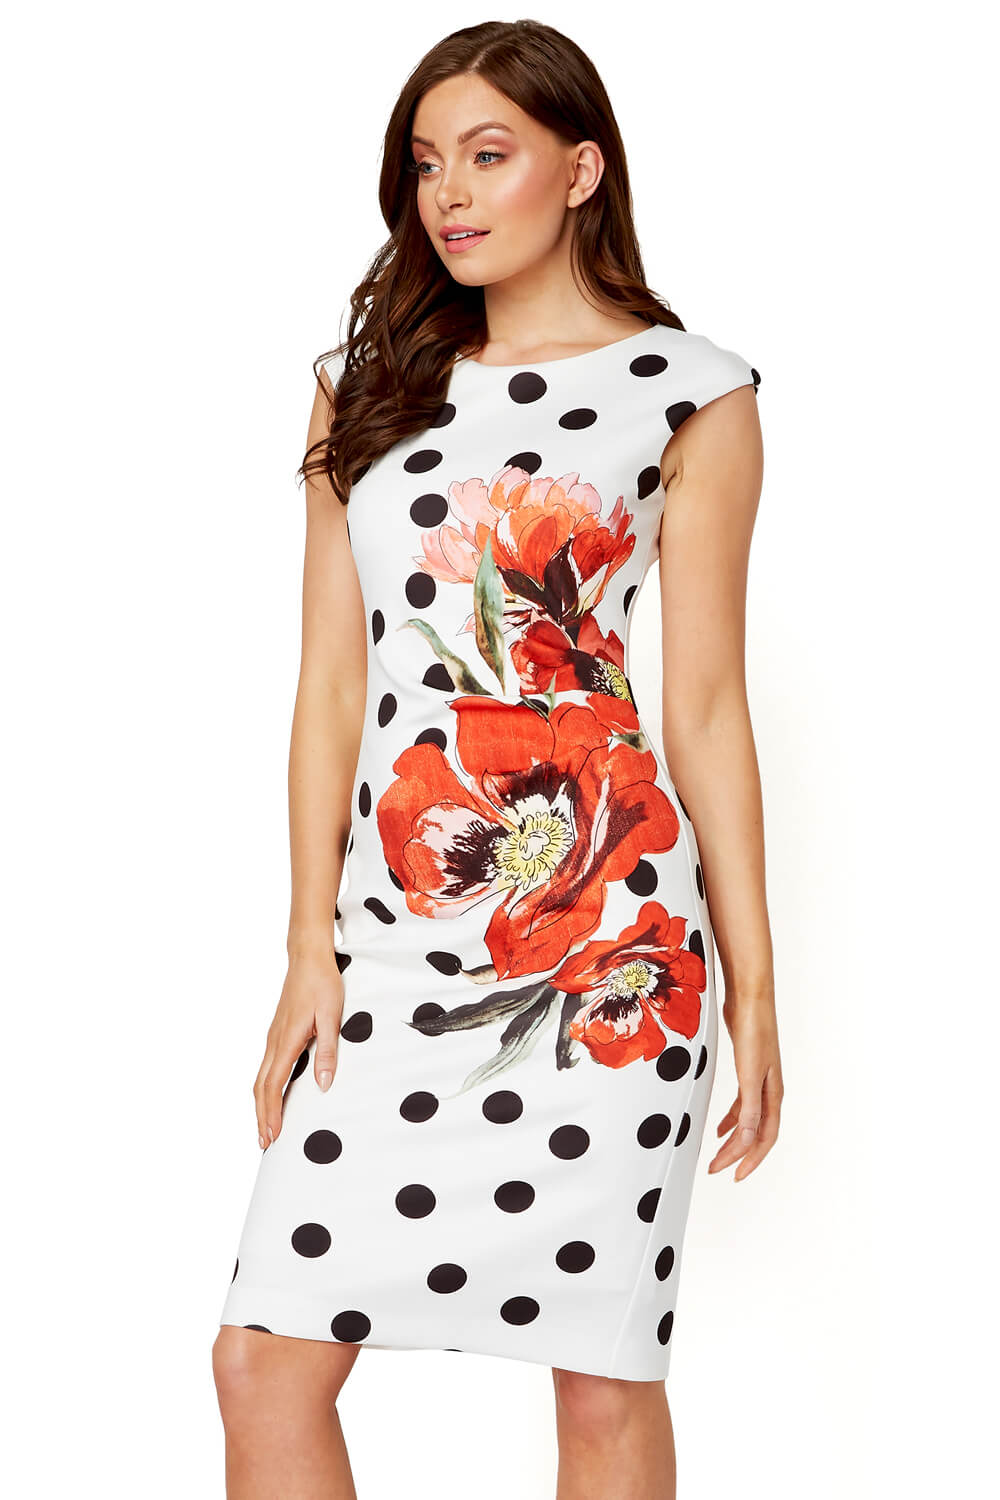 Red Spot Floral Print Premium Stretch Dress, Image 2 of 5